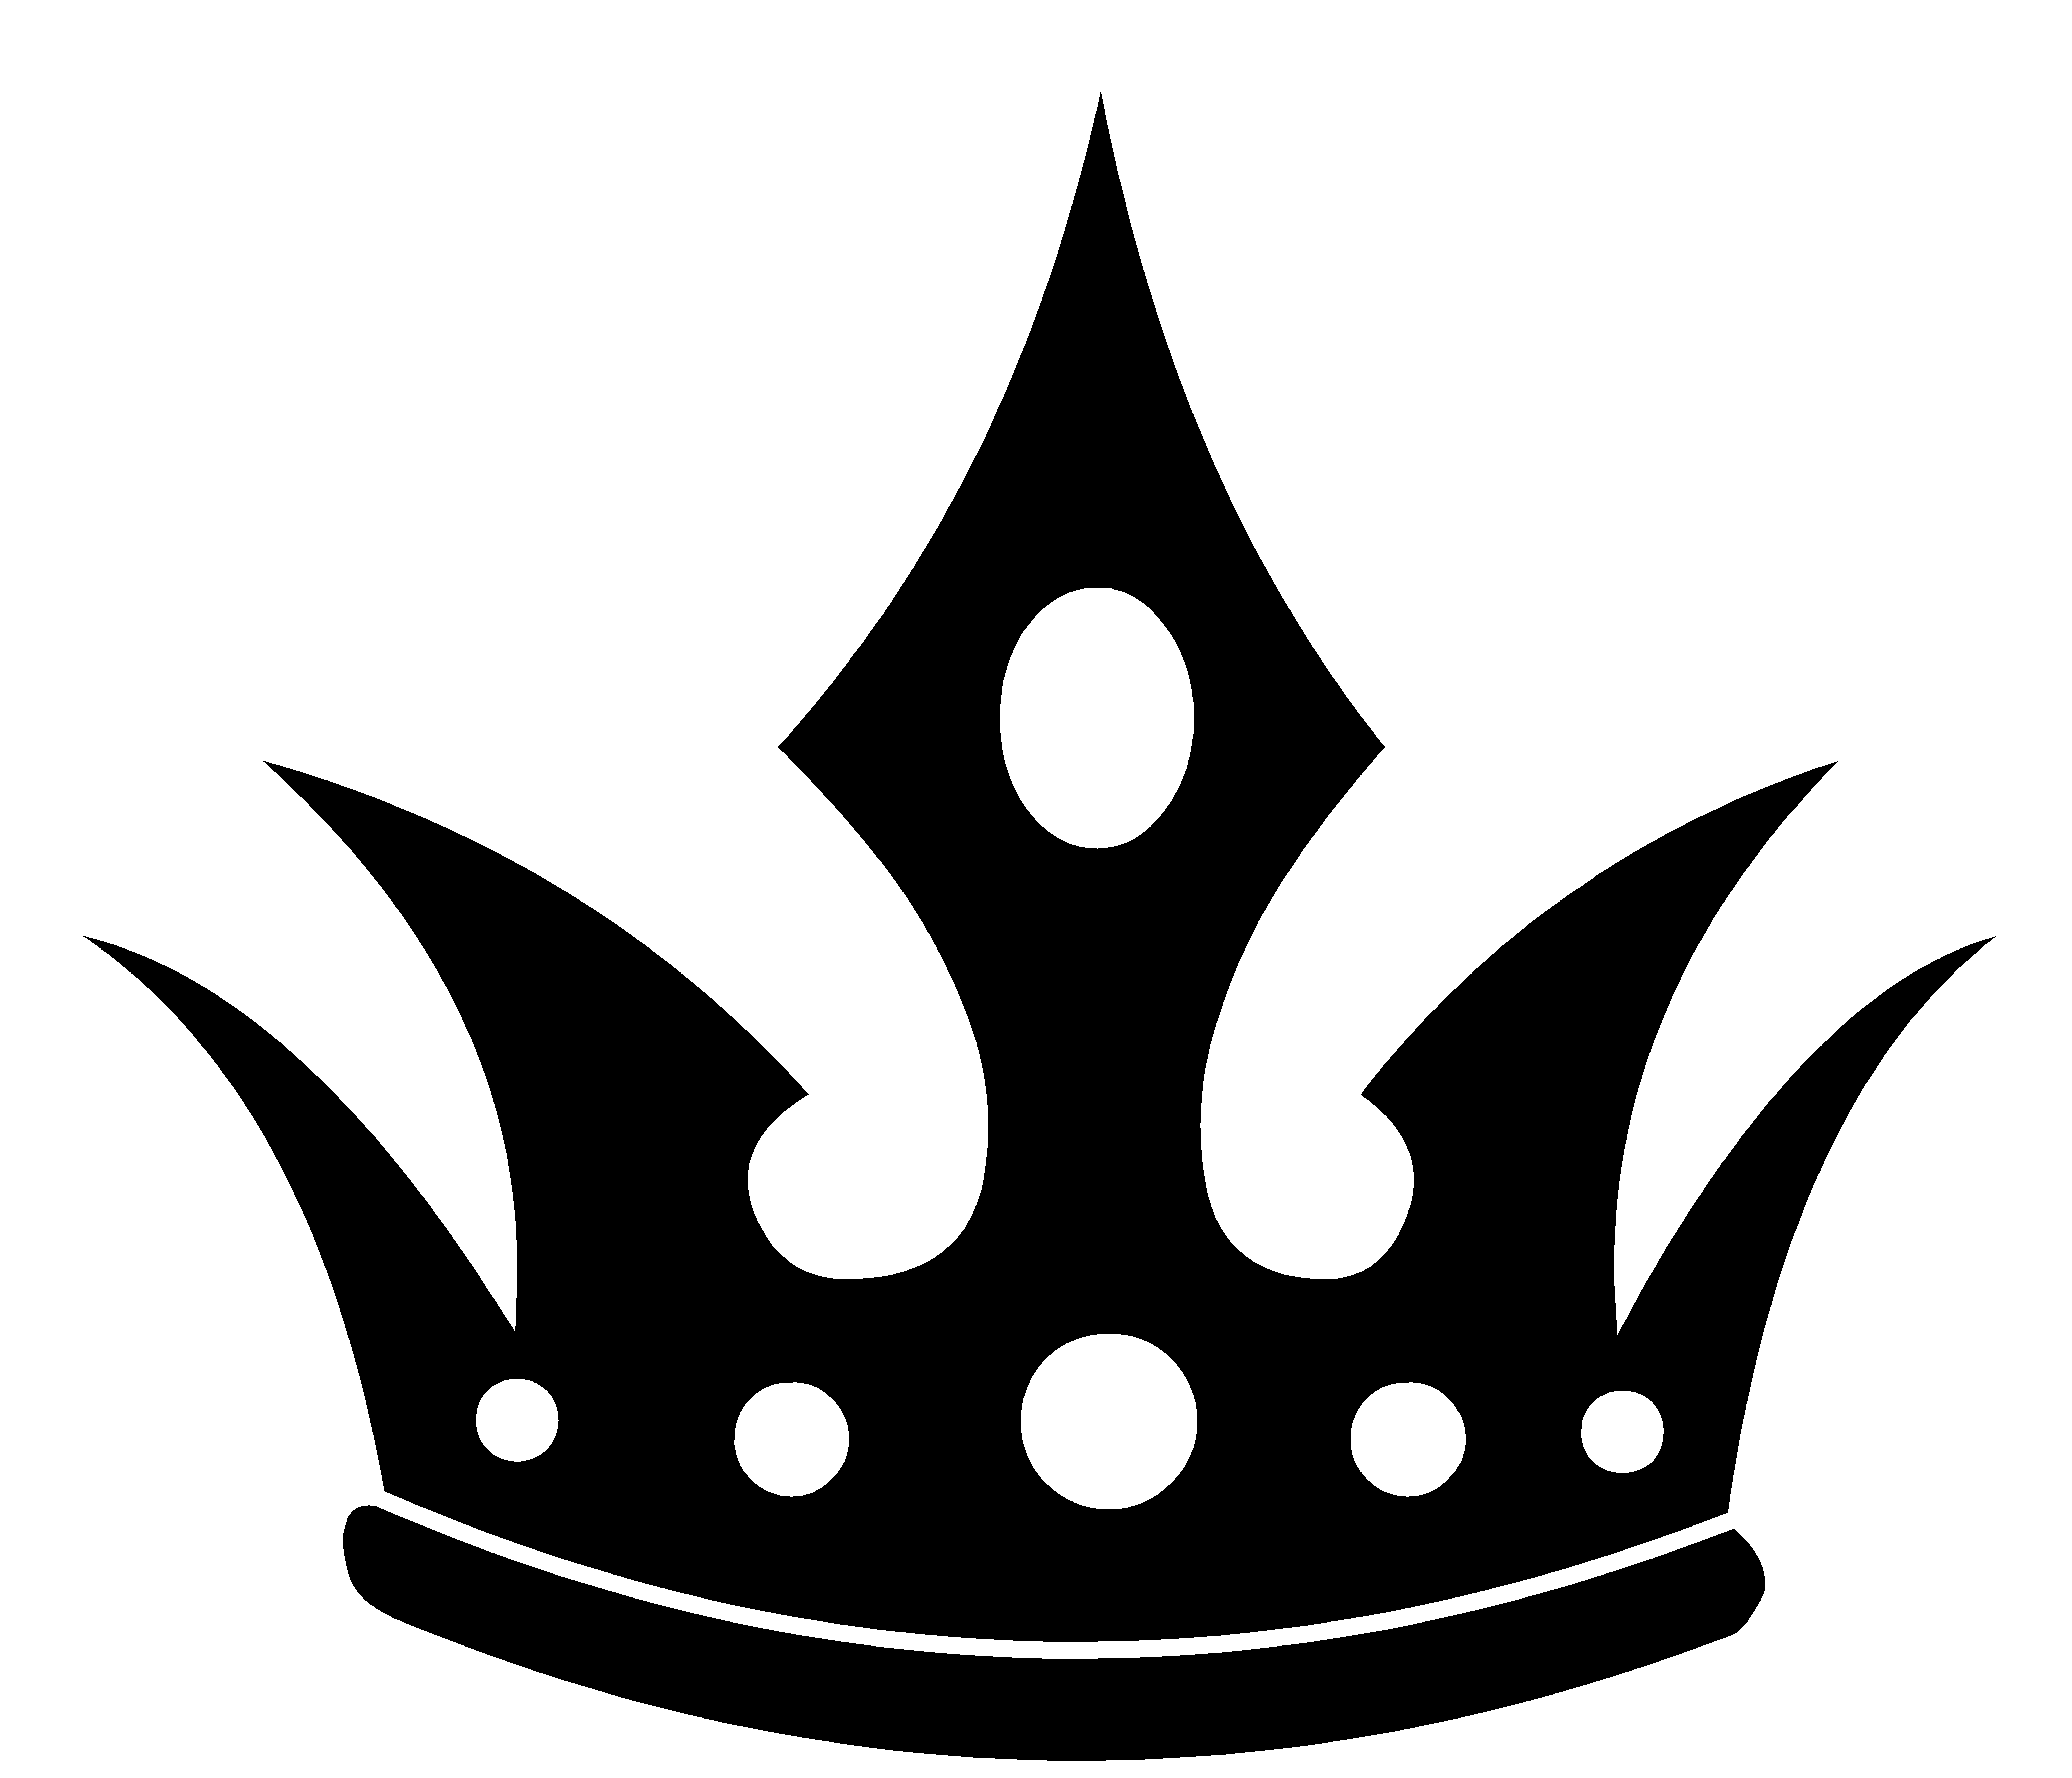 Black Kings Crown Clipart PNG Images, Black King Crown Logotype, Crown  Black, Crown King, King PNG Image For Free Download | Abstract logo,  Logotype, Crown logo